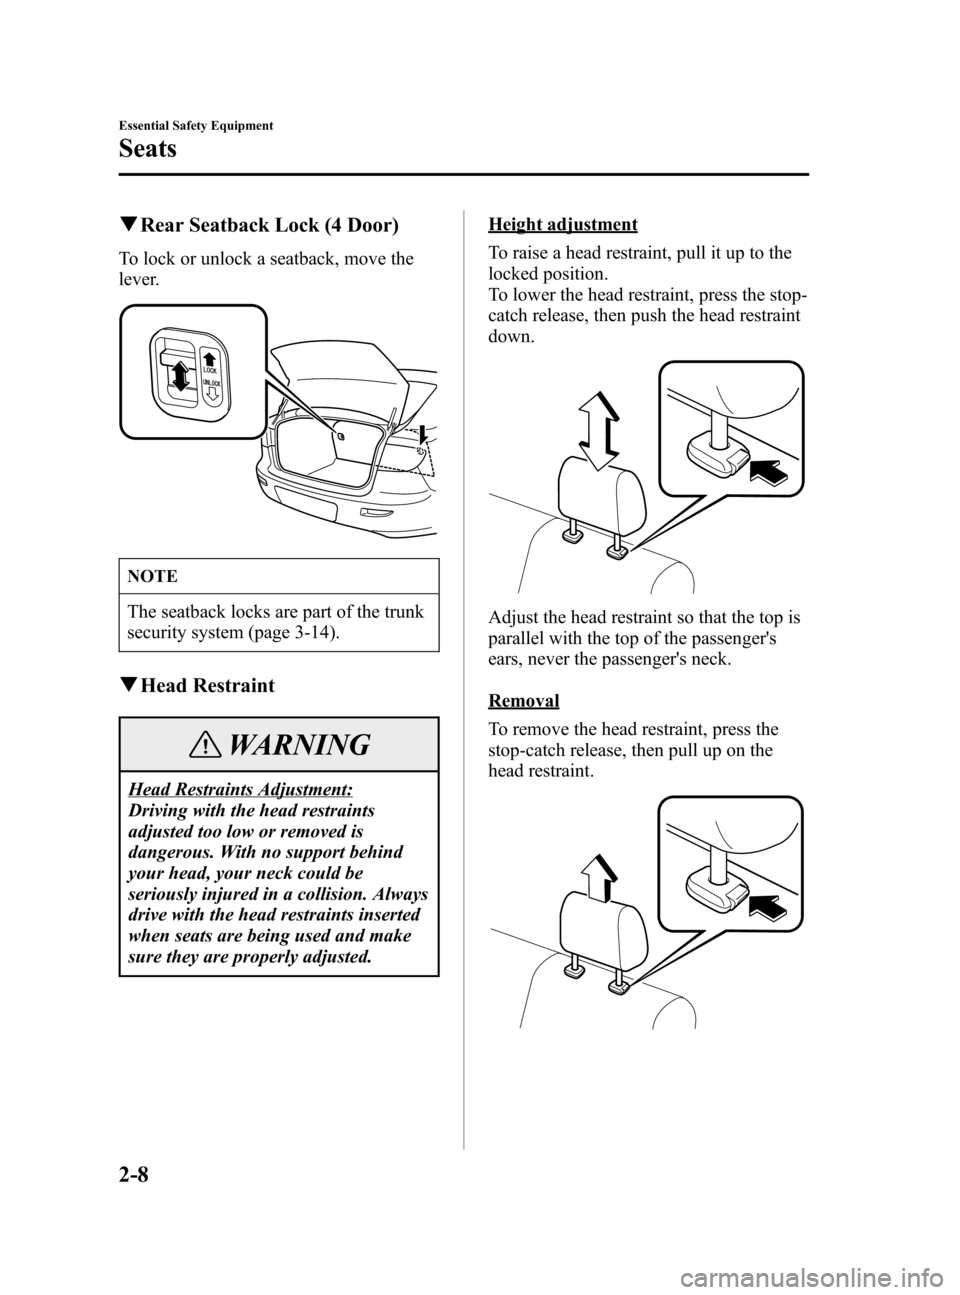 MAZDA MODEL 3 HATCHBACK 2005   (in English) Owners Guide Black plate (22,1)
qRear Seatback Lock (4 Door)
To lock or unlock a seatback, move the
lever.
NOTE
The seatback locks are part of the trunk
security system (page 3-14).
qHead Restraint
WARNING
Head Re